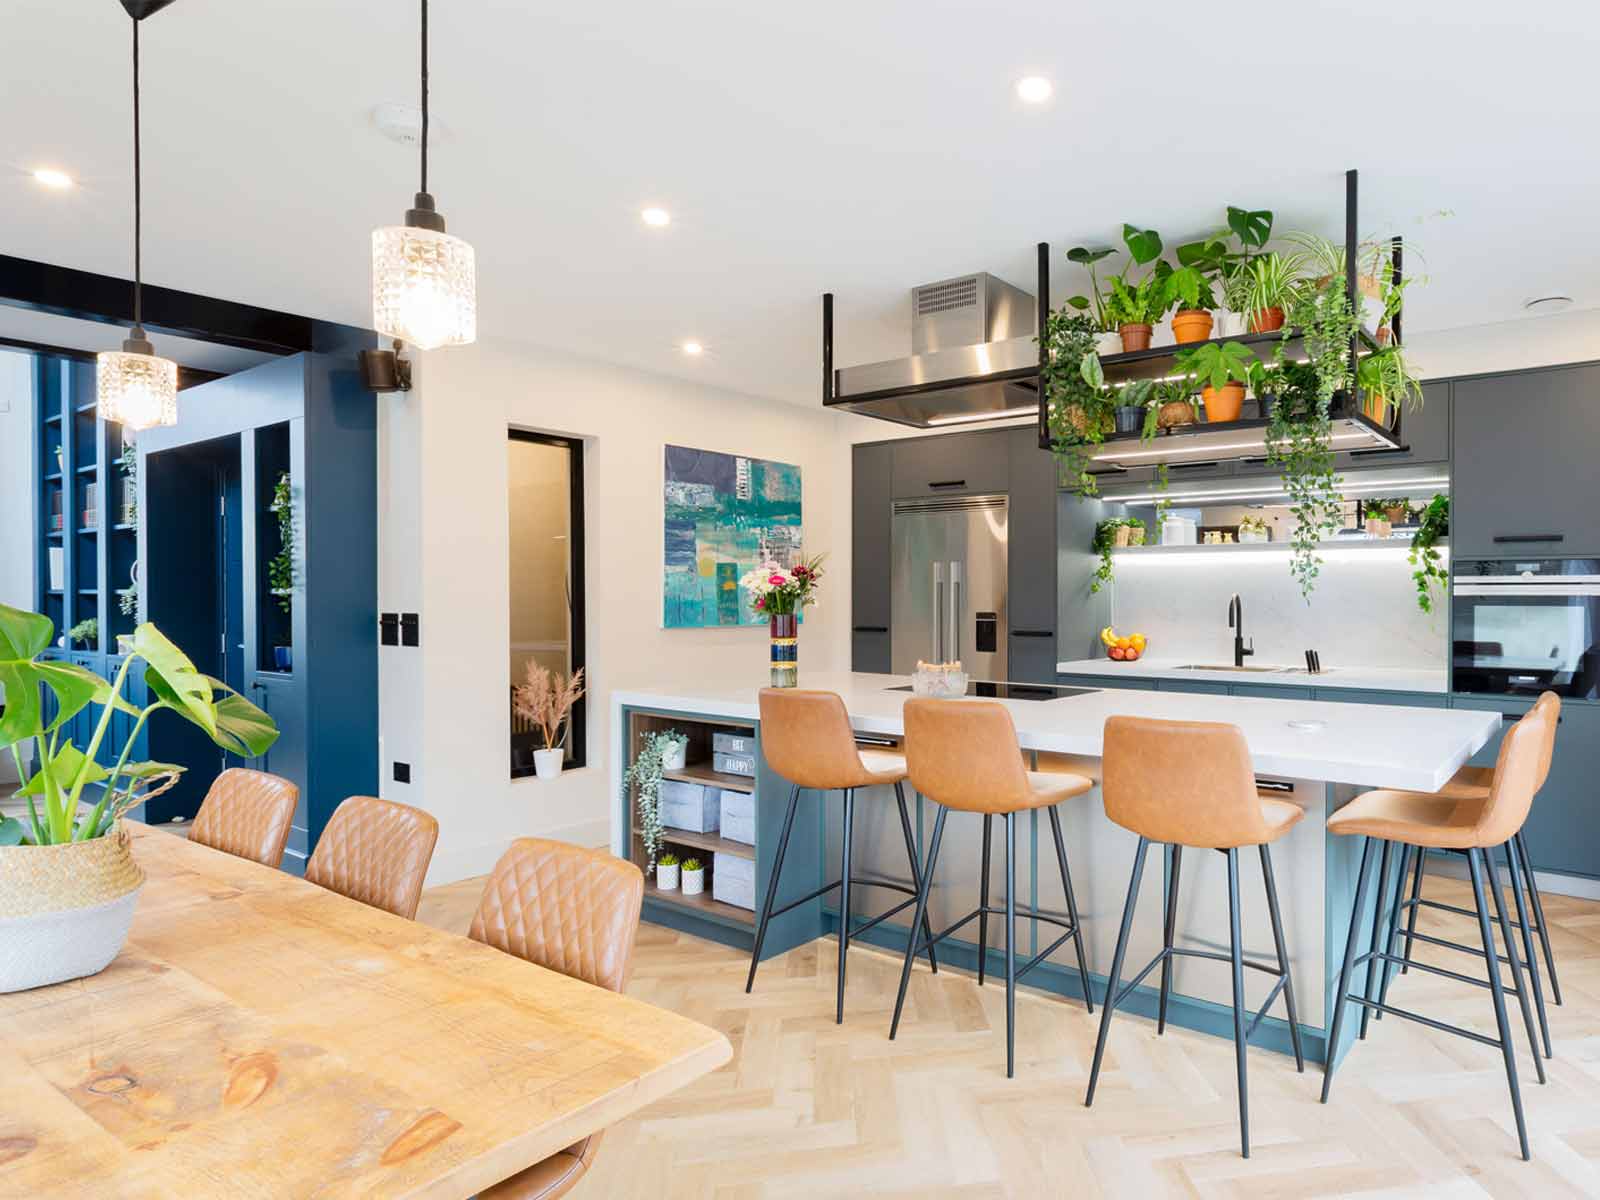 A natural-light-flooded kitchen that follows biophilic theory design principles